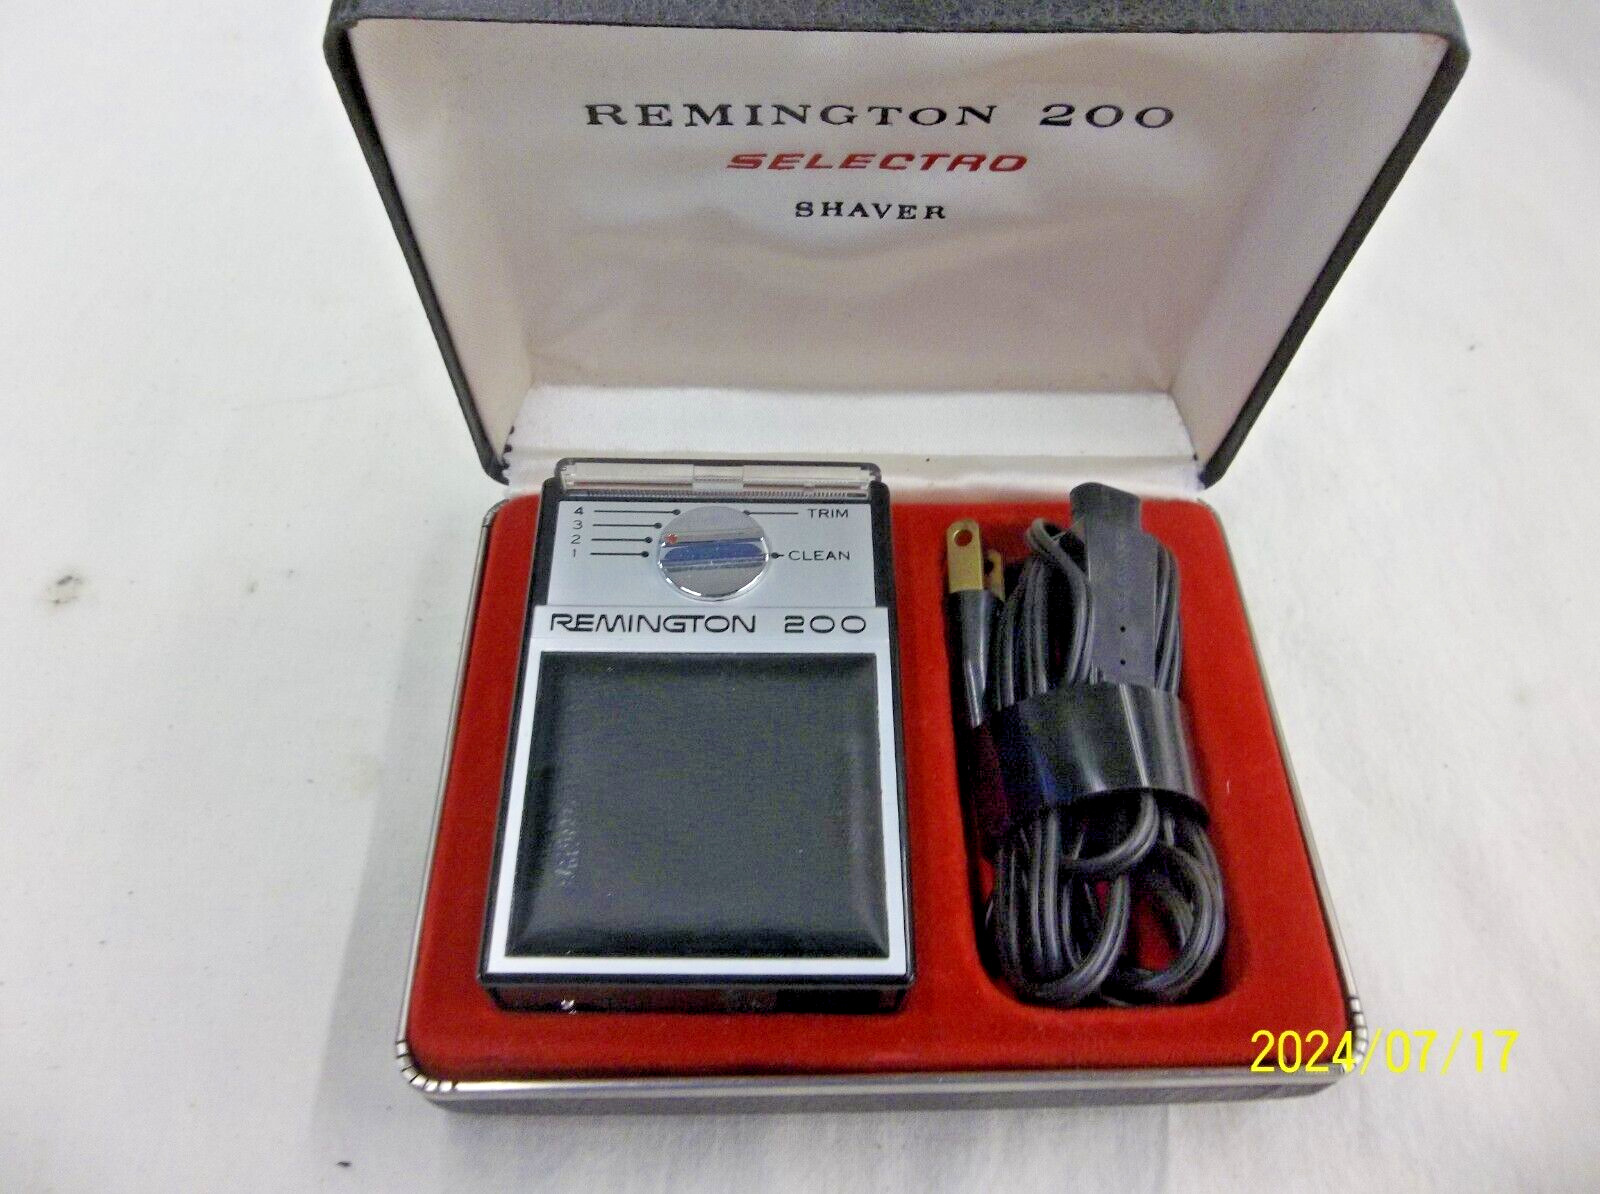 NEVER USED Vintage Remington 200 Selectro Shaver w/ Cord & Case